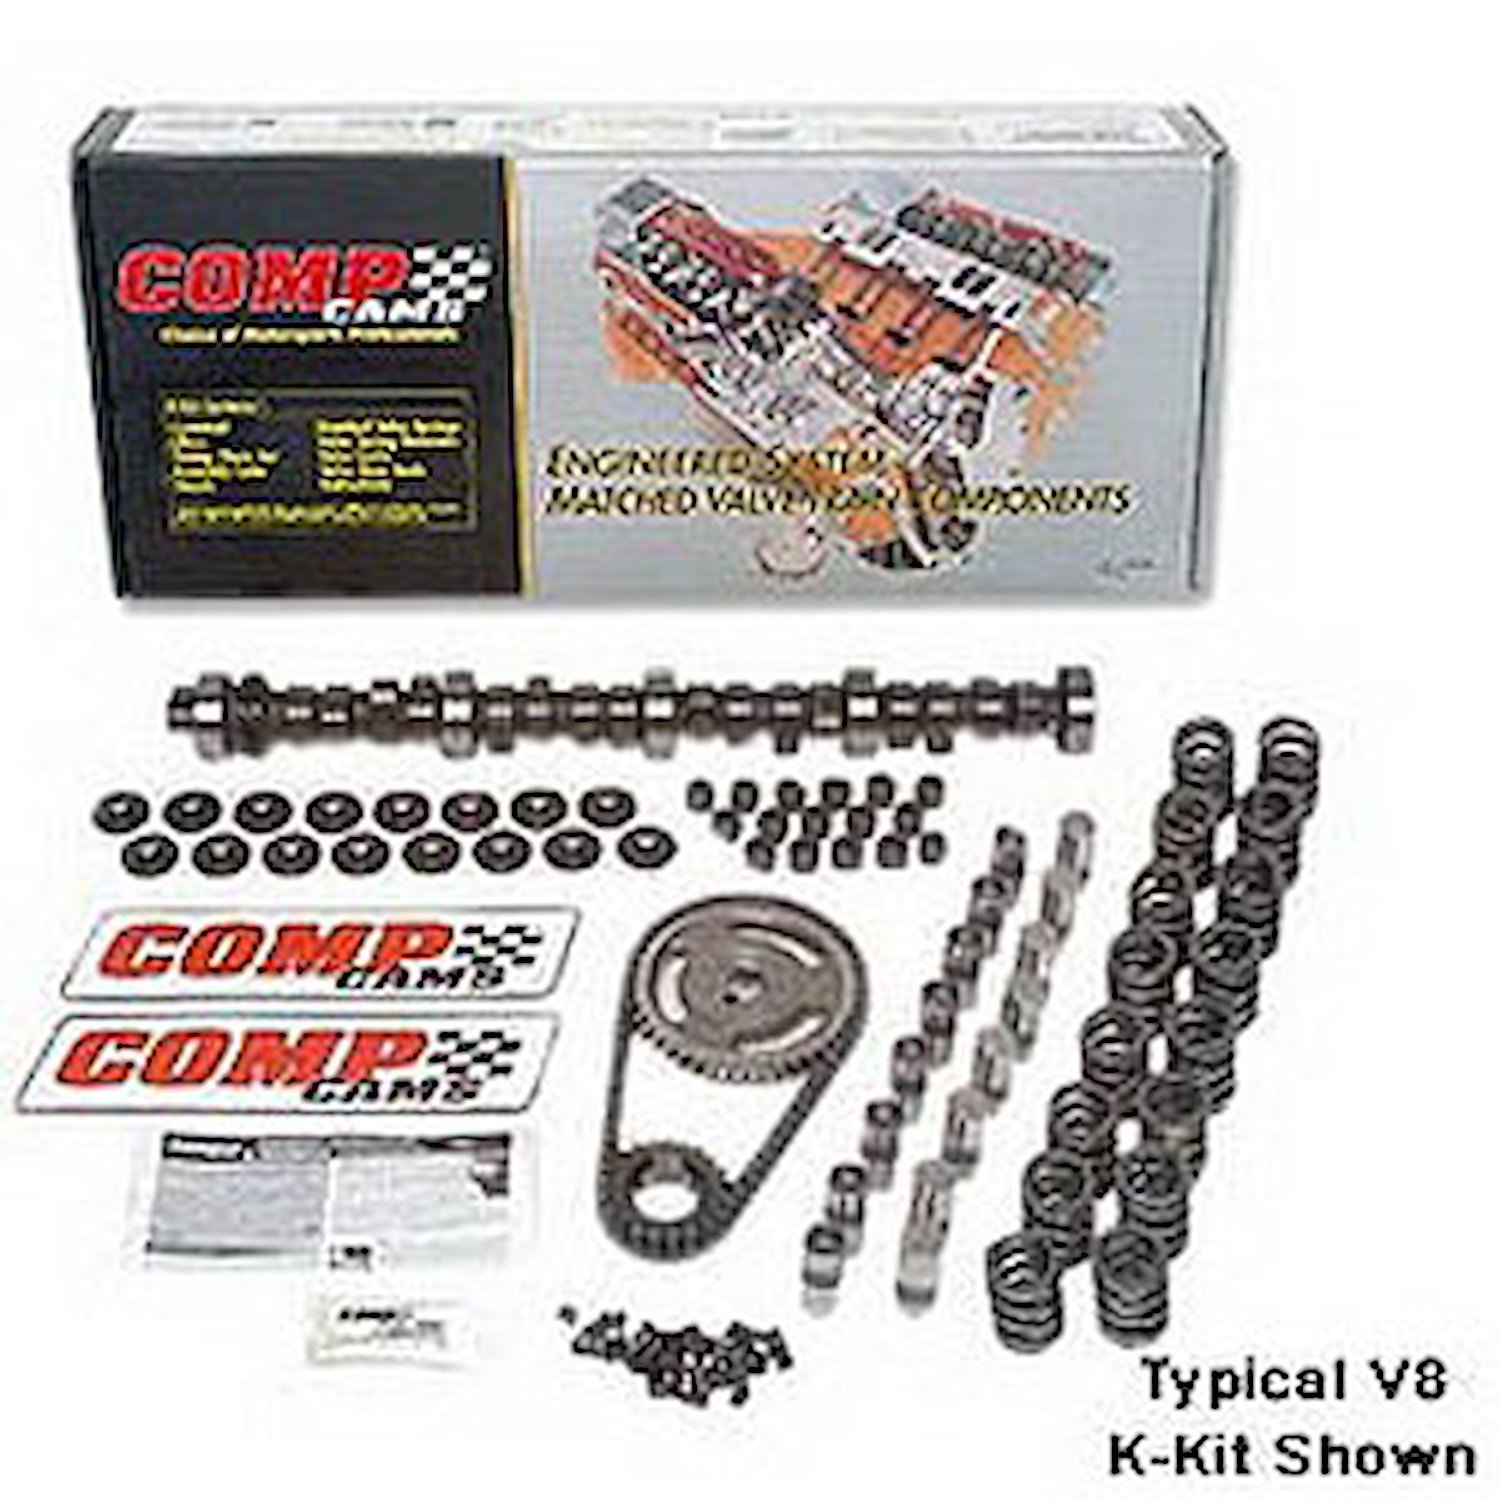 High Energy 252H Hydraulic Flat Tappet Camshaft Complete Kit Lift: .474" /.474" Duration: 252°/252° RPM Range: 800-4800